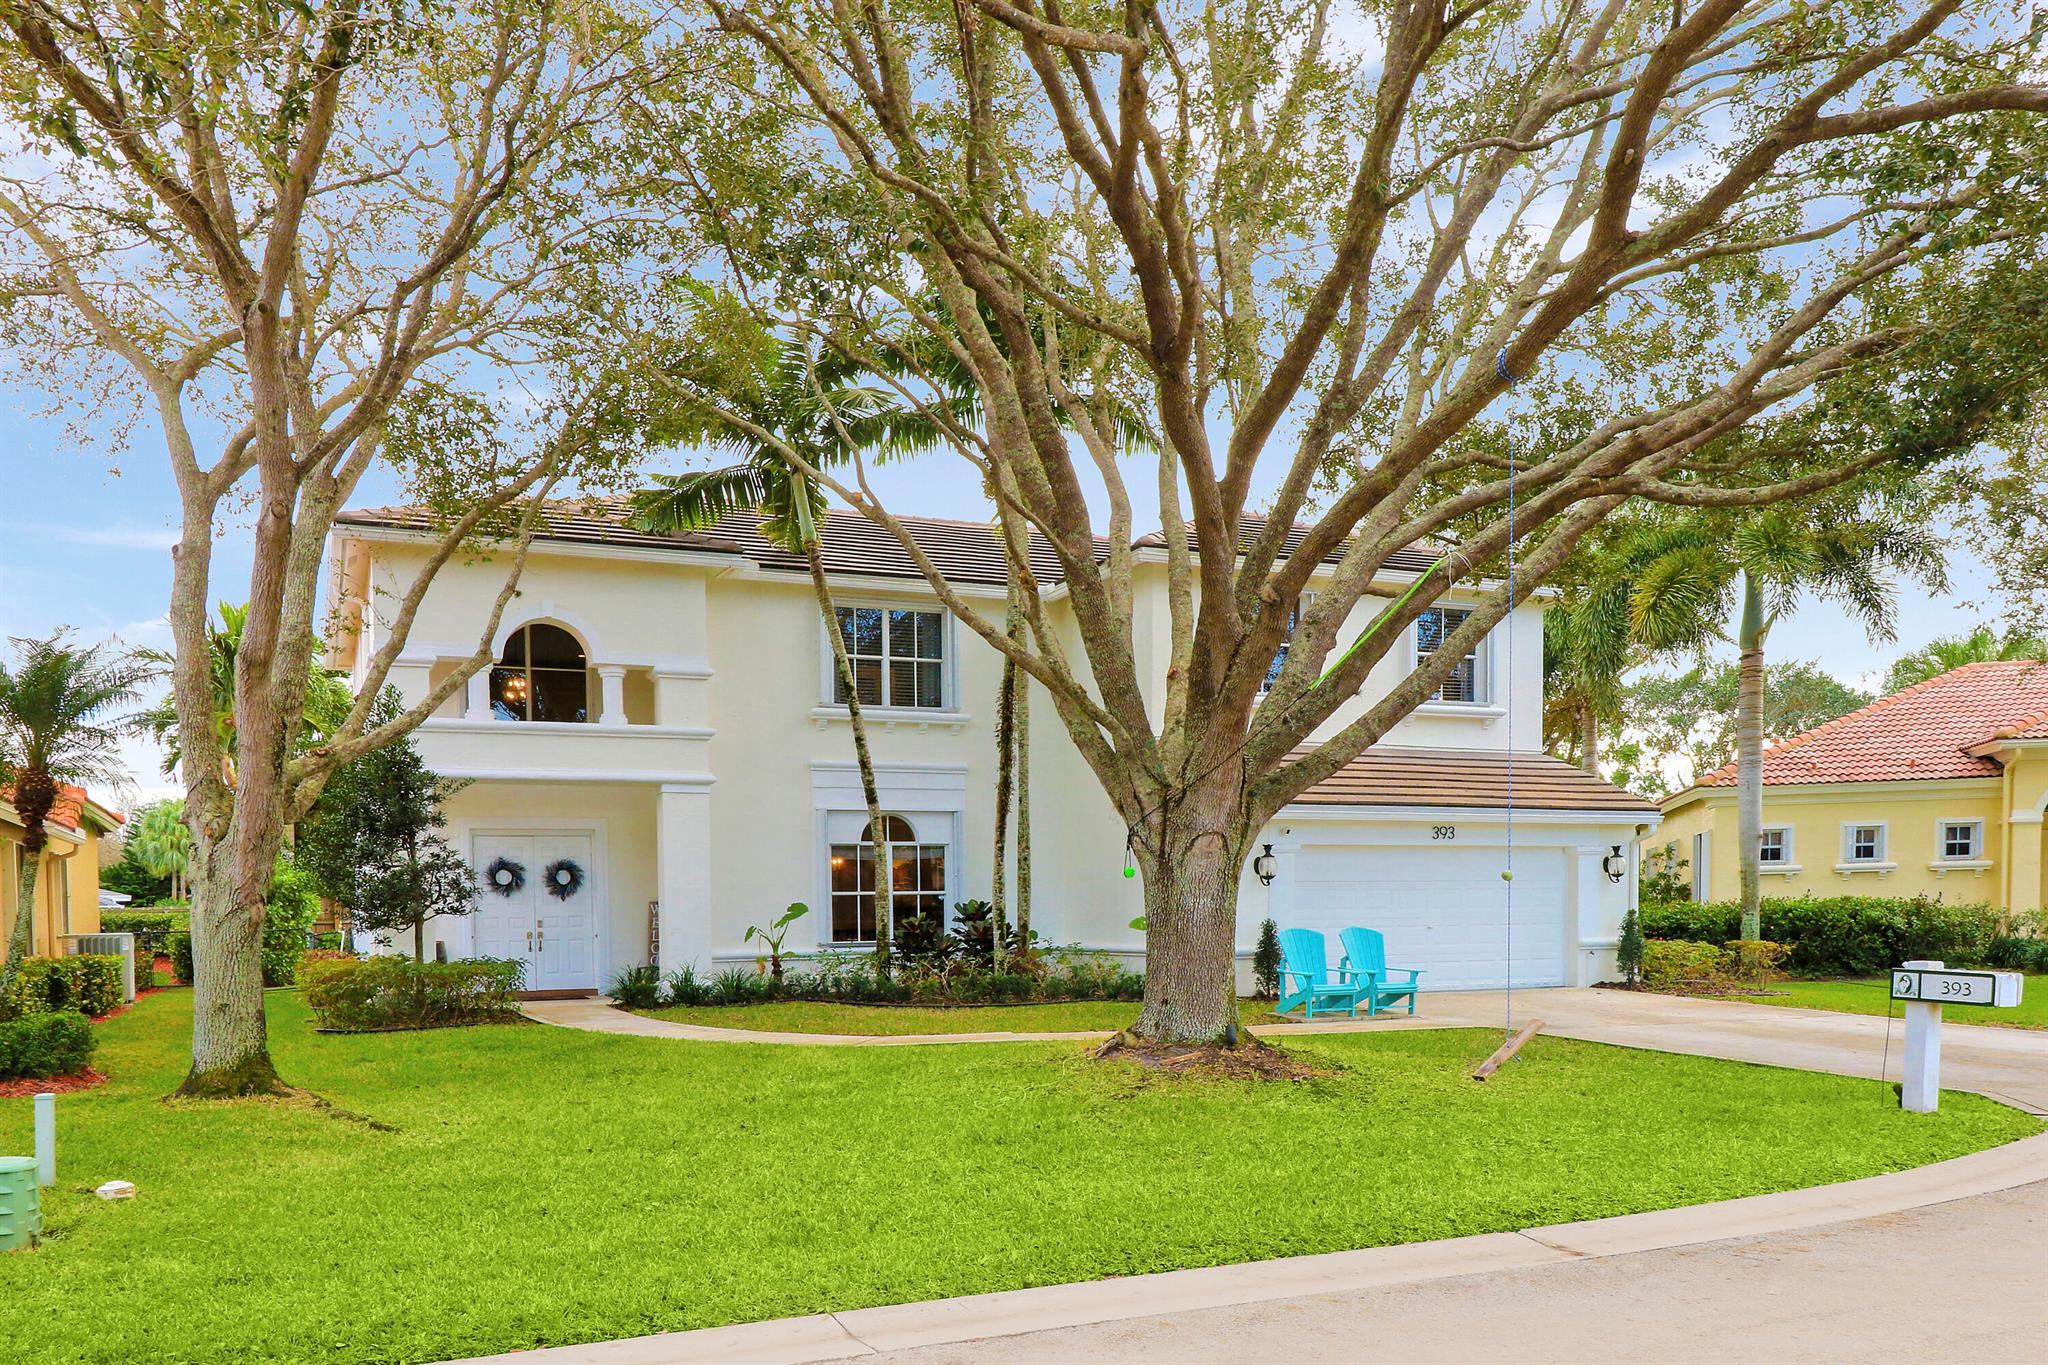 Welcome to this six-bedroom home in the desirable Egret Landing community of Jupiter, FL! This special property boasts a plethora of recent upgrades, making it a true gem in the neighborhood.The exterior of the home was freshly painted in 2022, giving it an impressive and inviting curb appeal. A brand-new tile roof was installed in 2020, providing peace of mind and protection for years to come. Additionally, the property features a whole house generator, ensuring that you'll never be without power during unexpected outages.Another of the standout features of this home is the solar panel system, which was installed in 2023 and is owned free and clear. With several months of proven functionality, these solar panels offer substantial energy savings and a more sustainable lifestyle. Inside, the home offers a spacious layout with 6 bedrooms and 3 full baths, providing ample space for comfortable living and entertaining. The kitchen is adorned with custom cabinetry, and a gas powered Viking range adding a touch of poshness and practicality to the heart of the home.  The first floor features luxury vinyl plank flooring.
For added peace of mind during storm season, the property features accordion shutters downstairs and hurricane glass on the main level sliders as well as the master bedroom window. This ensures that your home is well-protected against the elements.
Situated on cul-de-sac, this home is surrounded by friendly neighbors streetside and offers a private poolside oasis featuring turf (2022) in the back. Don't miss the opportunity to make this exceptional property your own and enjoy the best of Jupiter living!

Schedule a showing today and experience the beauty and functionality of this remarkable home for yourself.